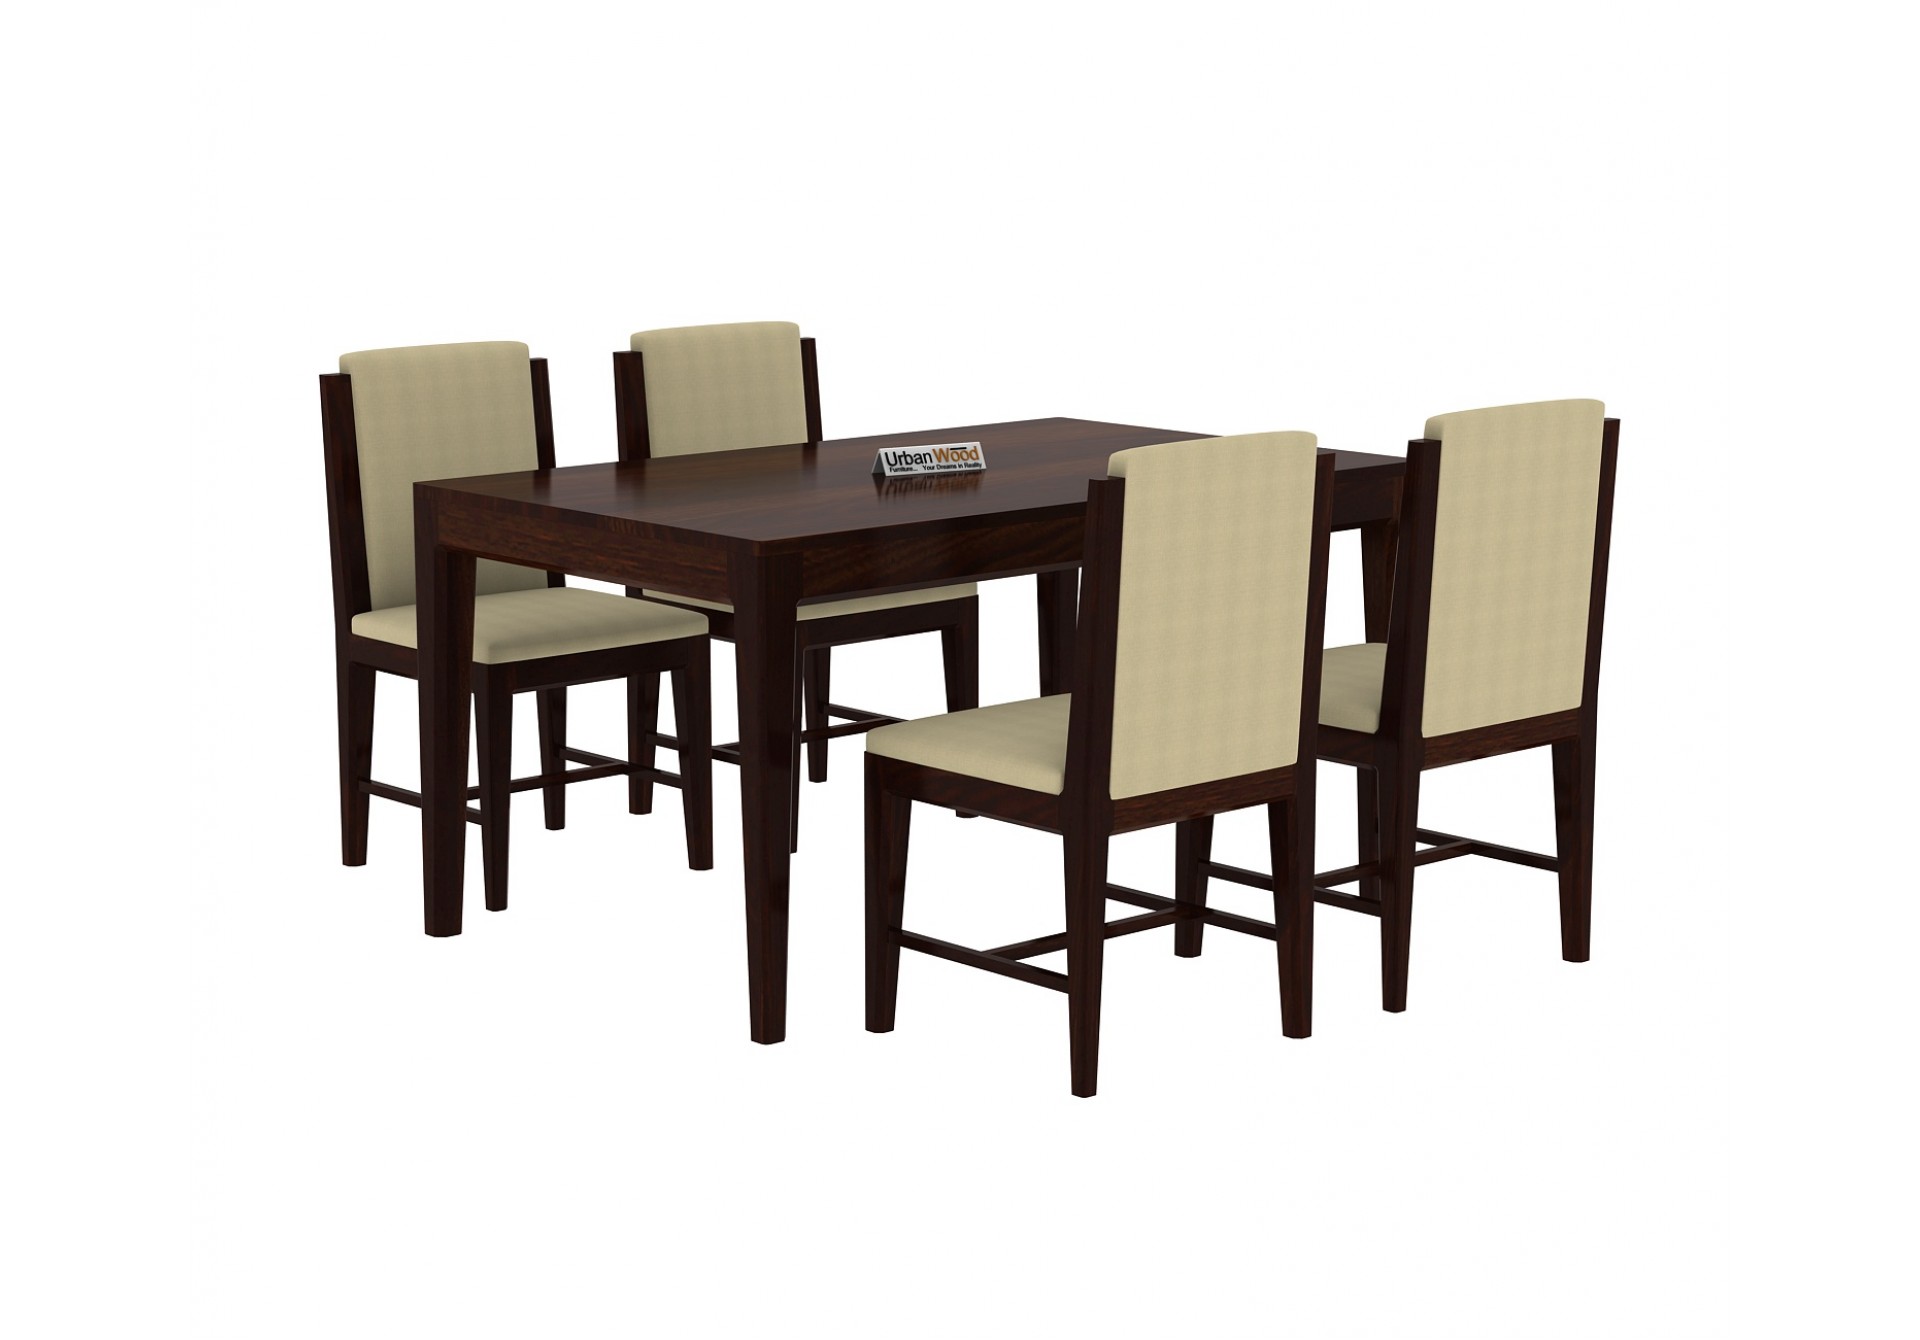 Deck 4-Seater Dining Table ( Walnut Finish )